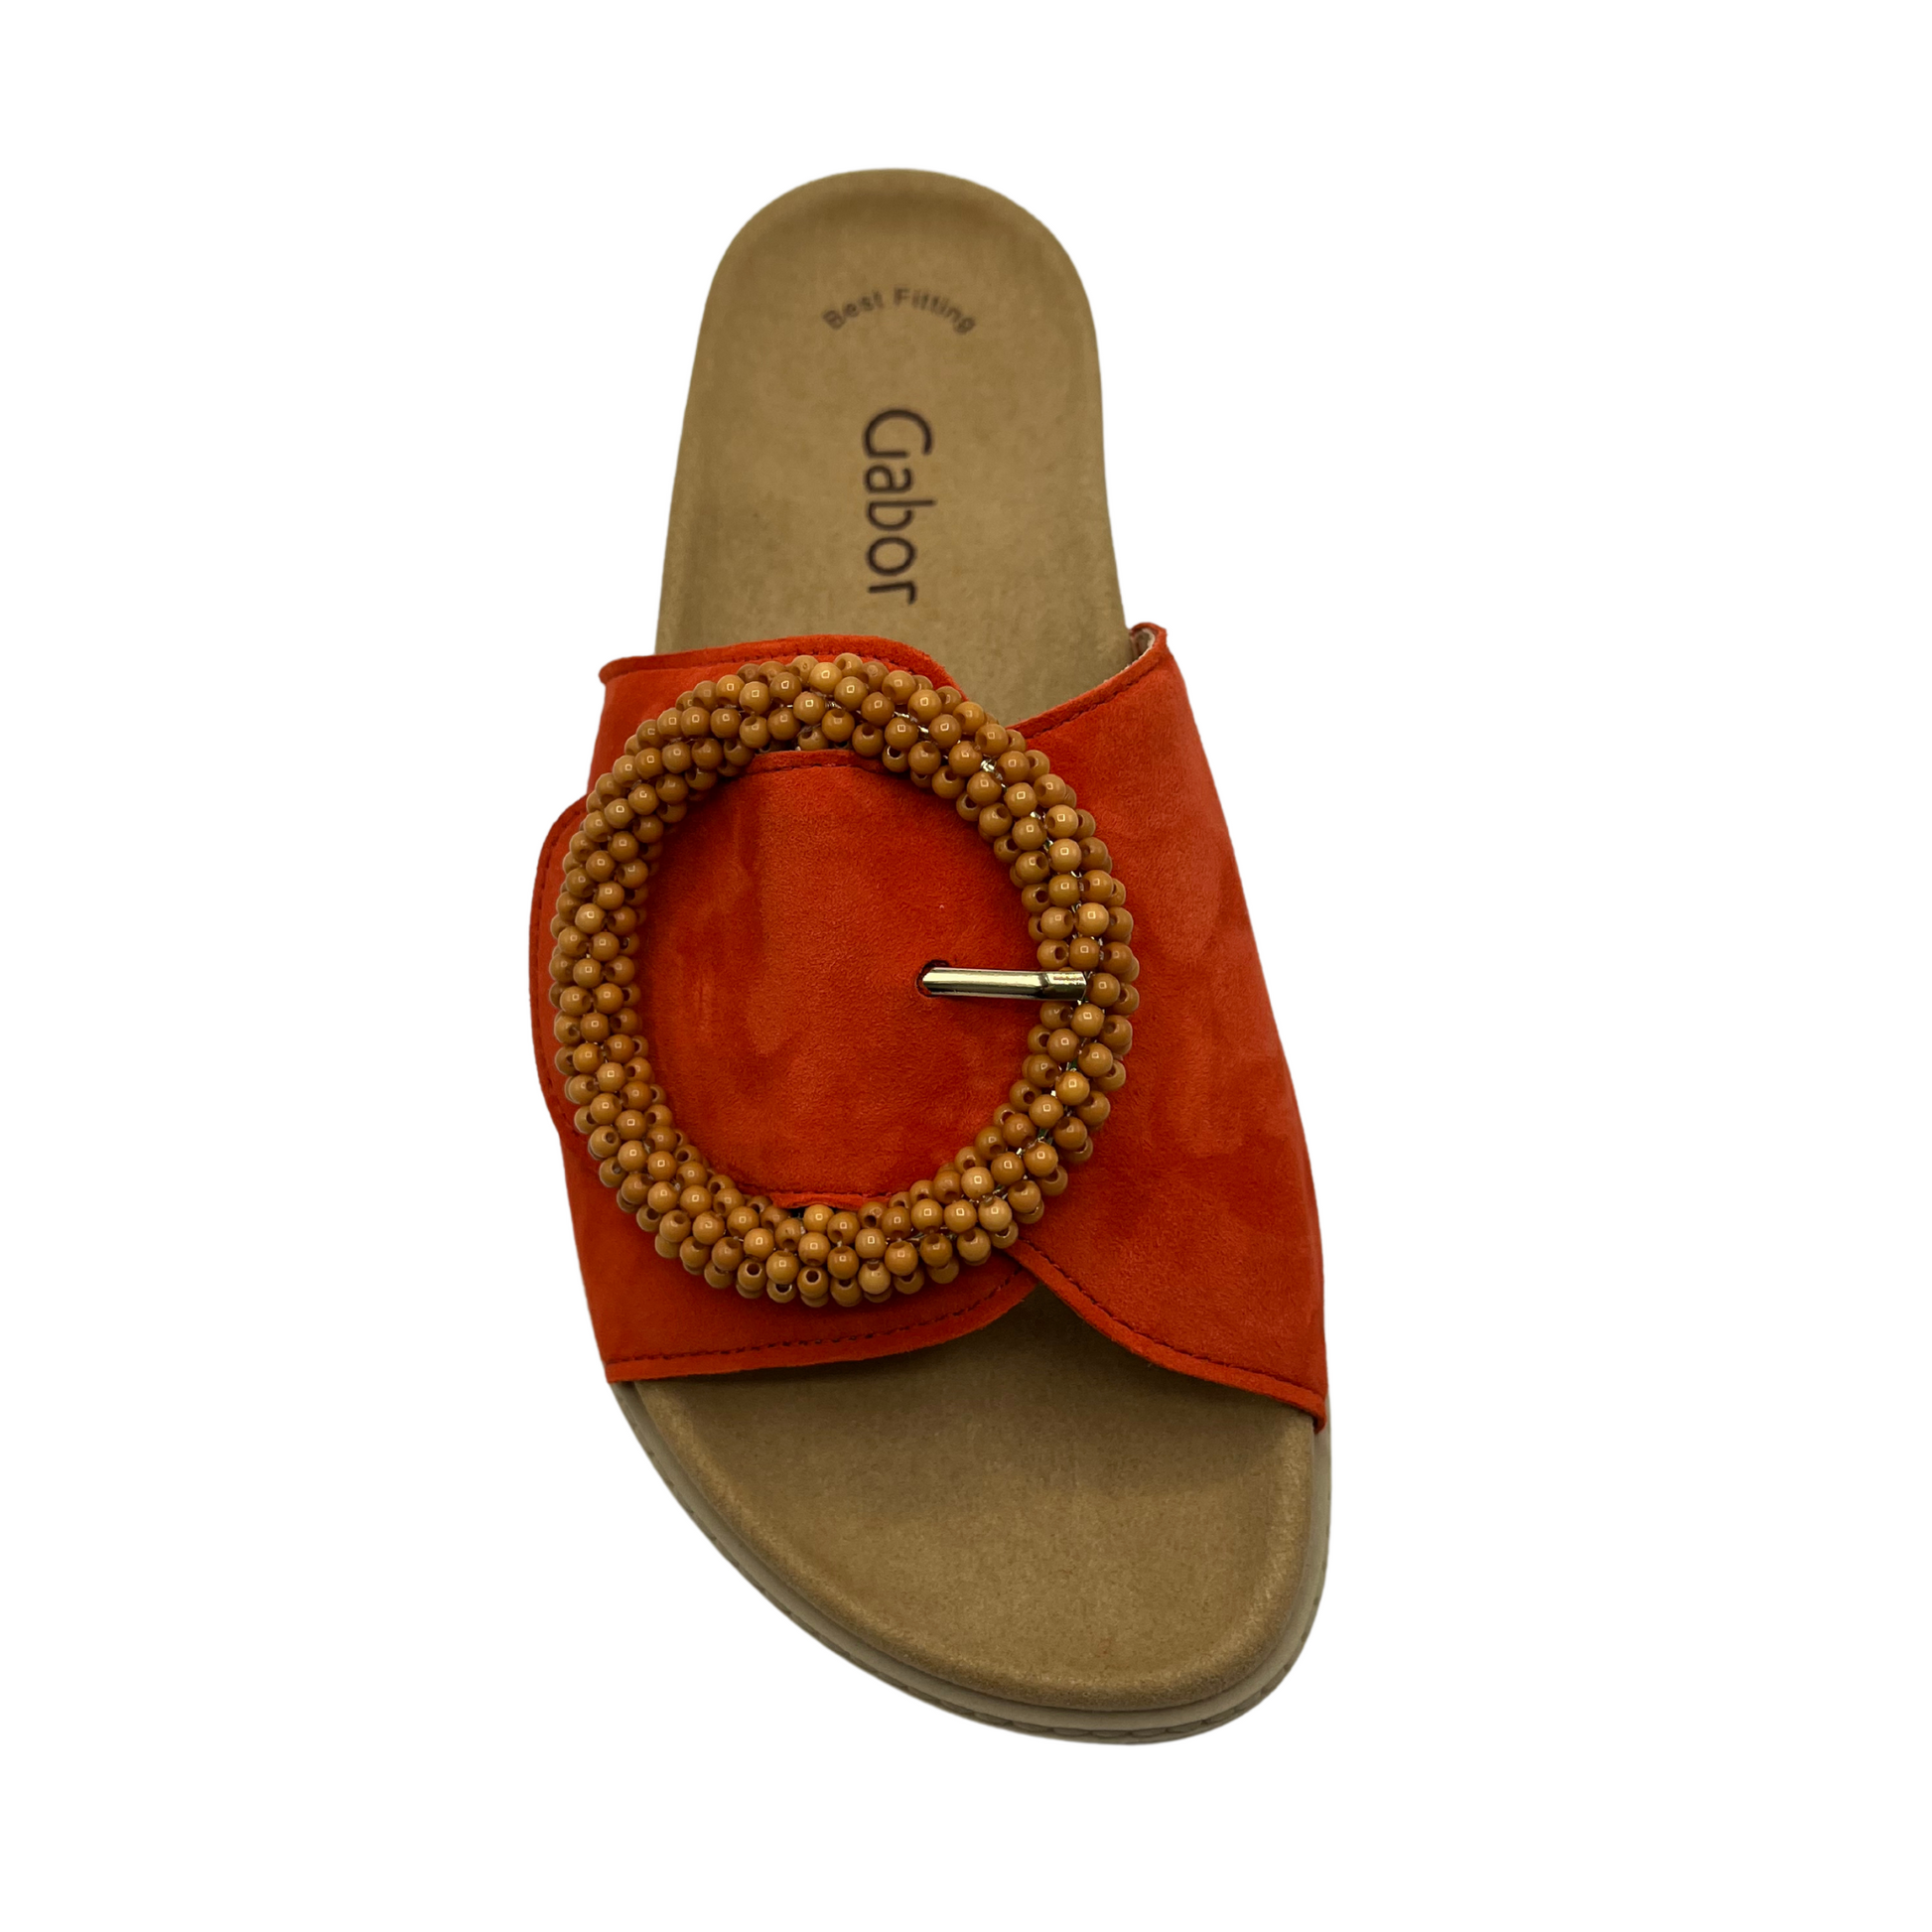 Top view of orange suede slide with large buckle detail and anatomical footbed